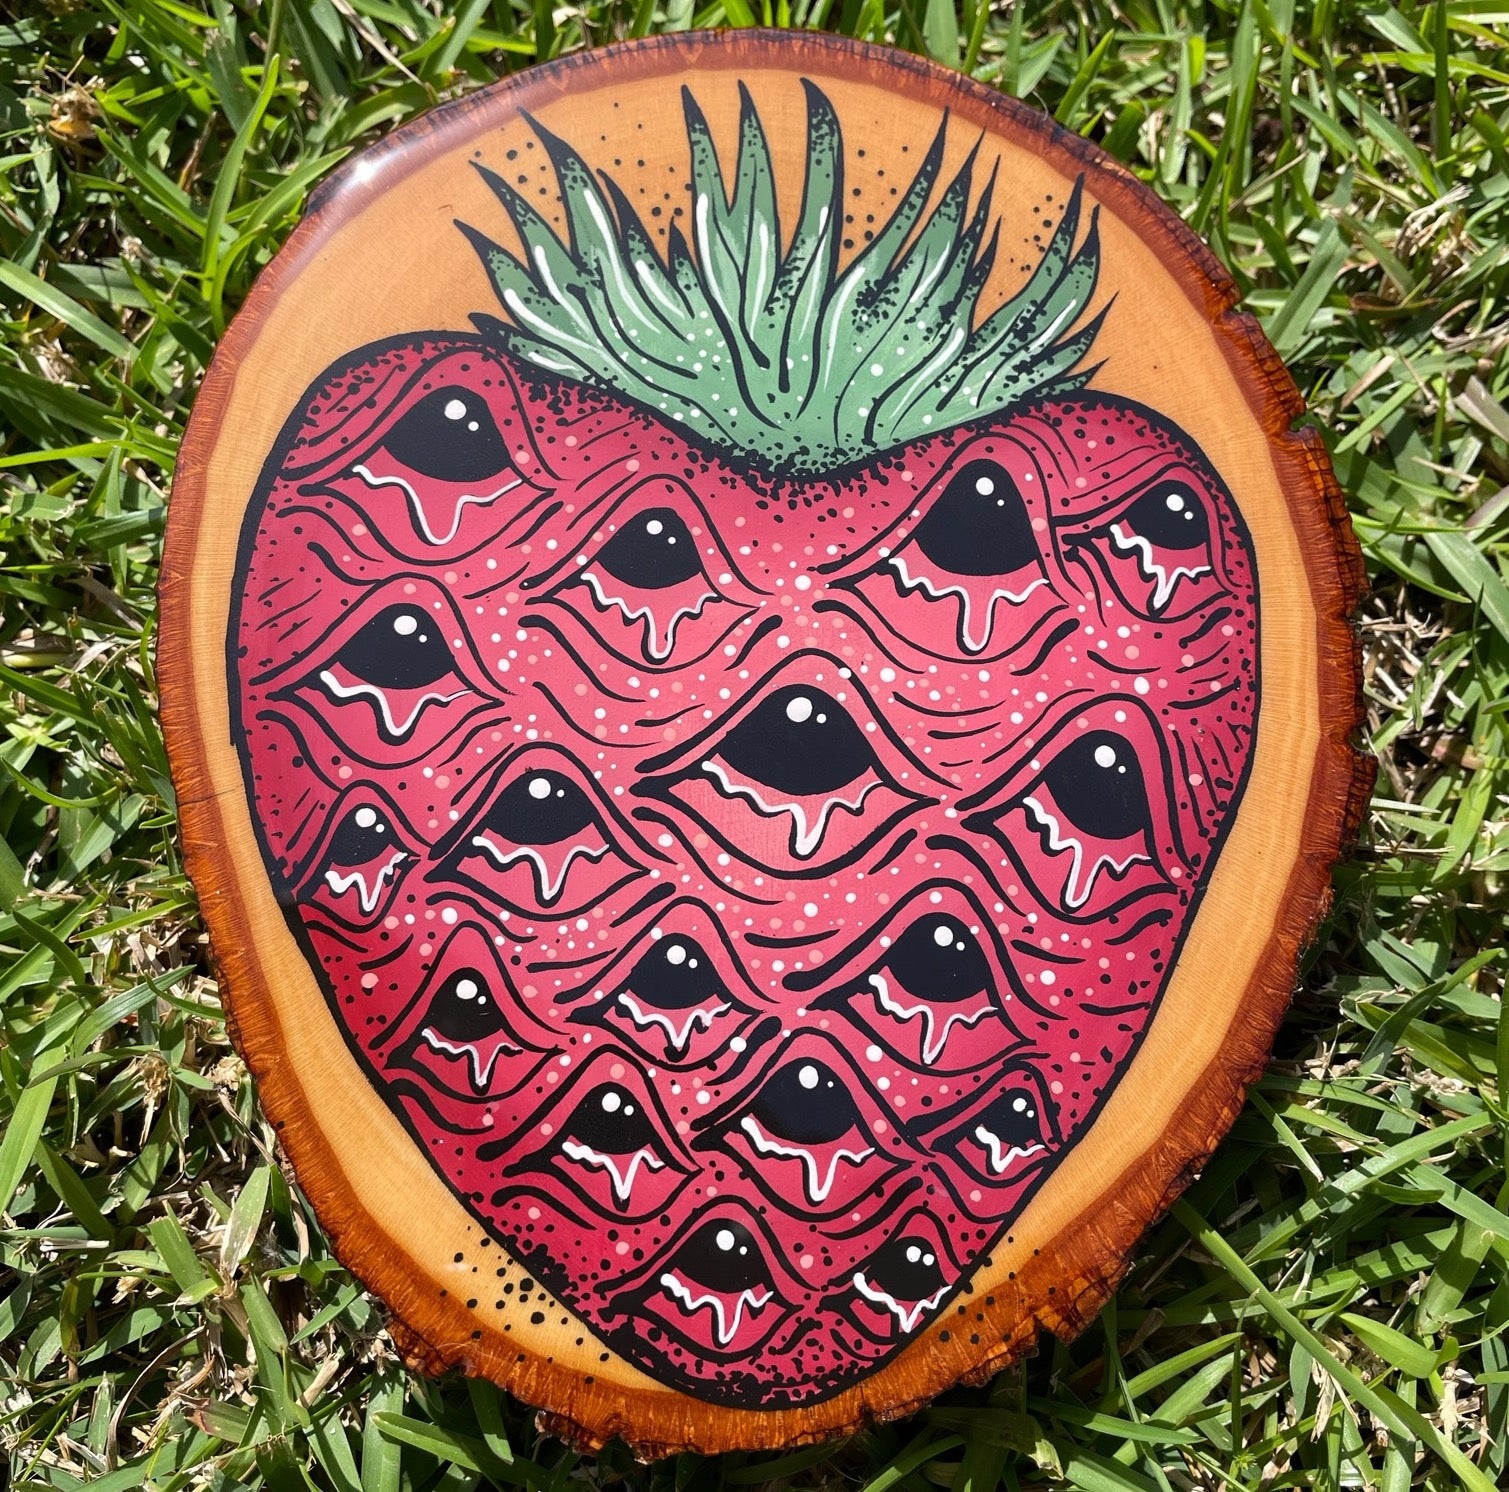 A photo of Louisiana artist, Tristen Rolling's original acrylic painting of a Louisiana strawberry on a round slice of oak wood. The painting is coated in a layer of epoxy resin and reflects Tristen's love for Louisiana farmers markets.  